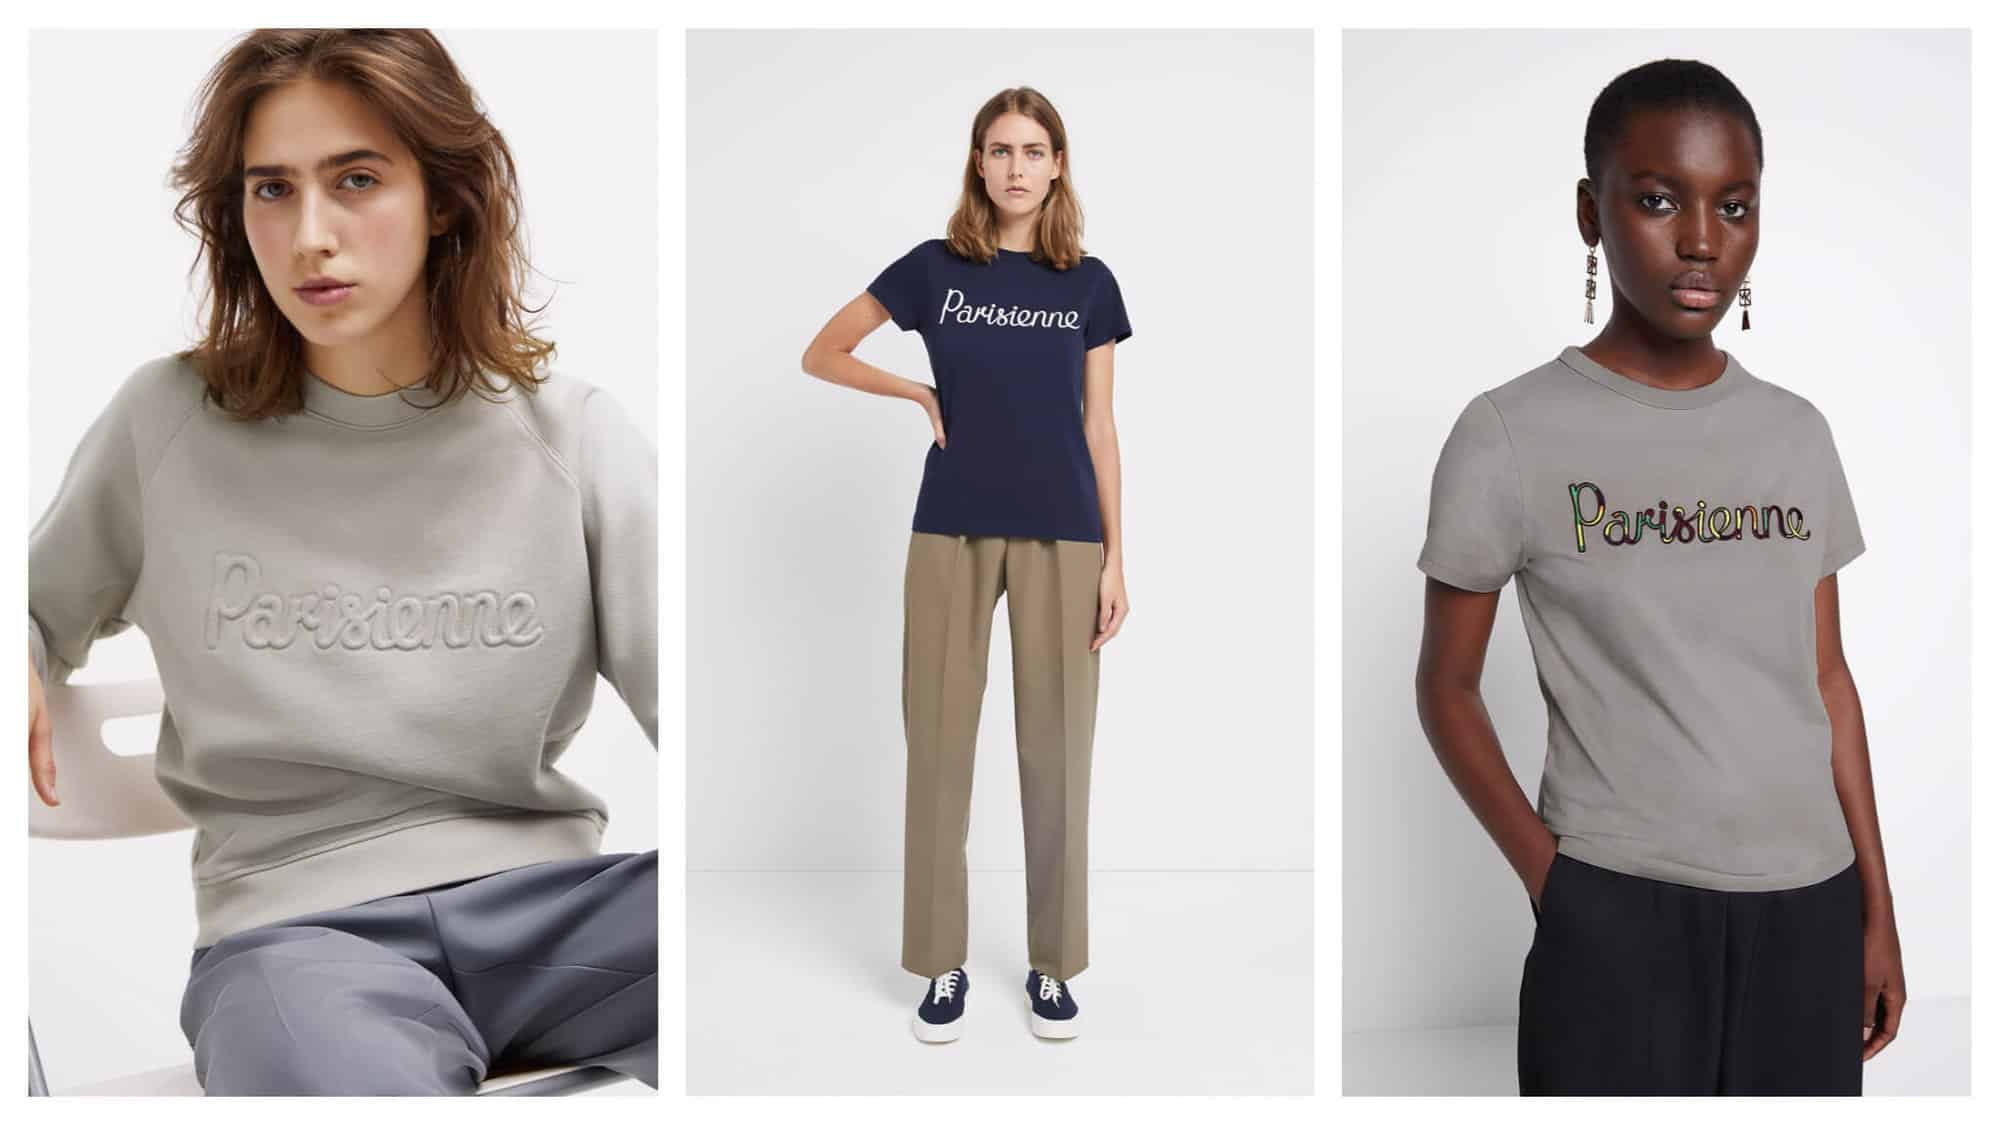 Left: a woman with shoulder length brown hair, grey trousers and a lighter grey sweatshirt sits on a white. Center: a woman with dirty blond shoulder length hair, a short sleeved dark blue t-shirt and beige trousers stands against a white background. Right: a woman black woman with short black hair stands against a white background wearing black trousers and a short-sleeved grey t shirt. Each of their shirts say 'Parisienne'.